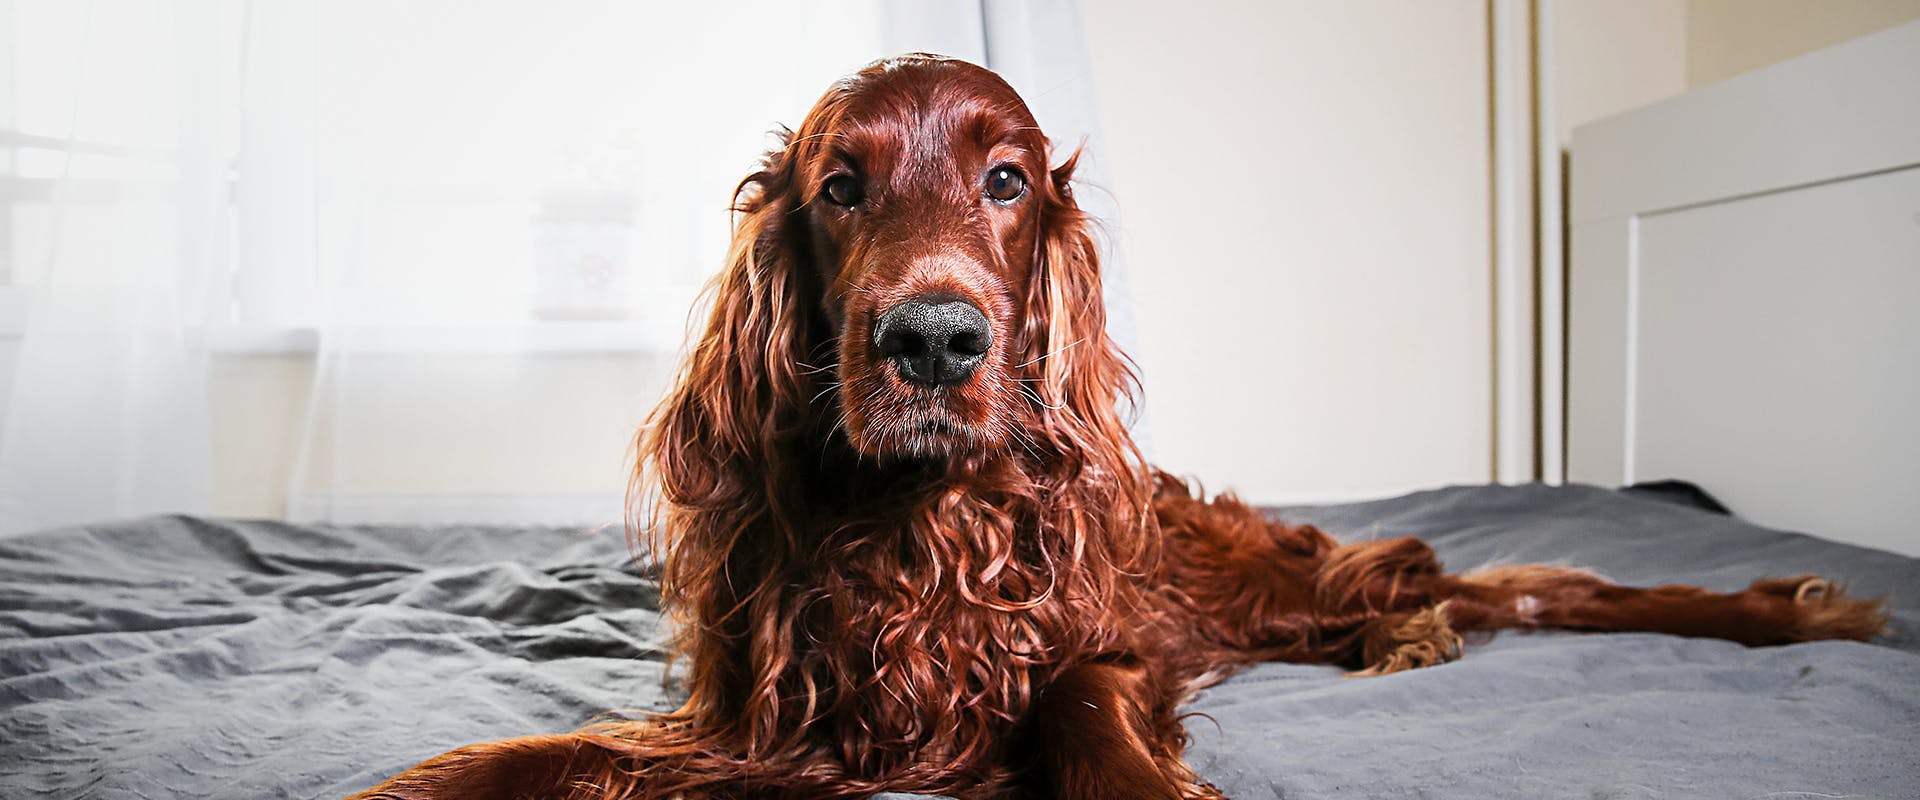 An Irish Setter dog with floppy ears sitting on an unmade bed